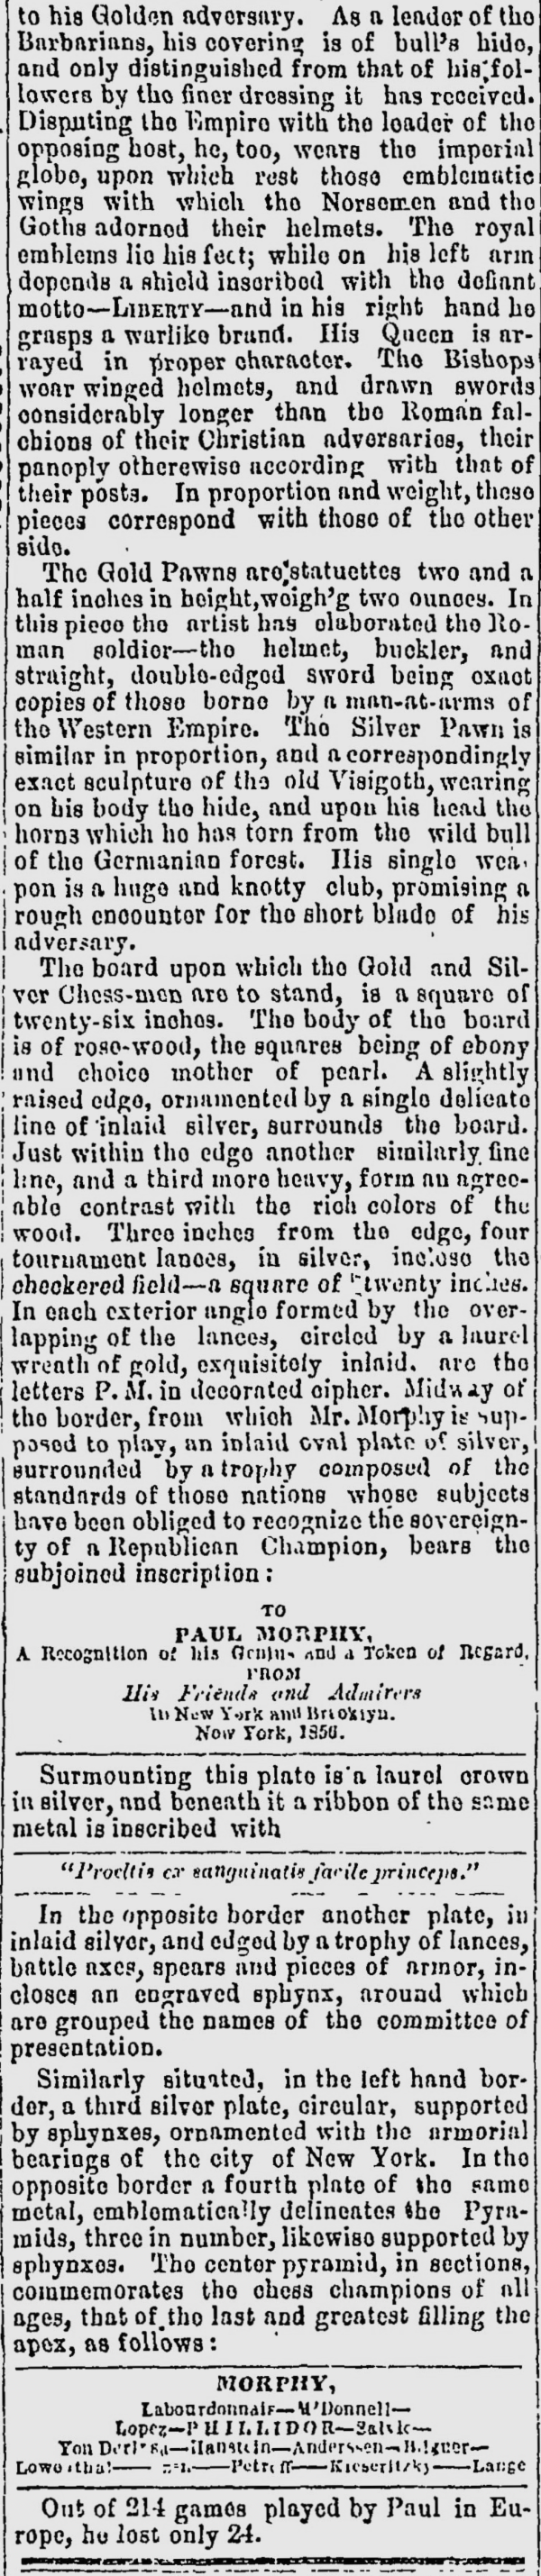 1859.06.04-02 Quincy Daily Whig.png